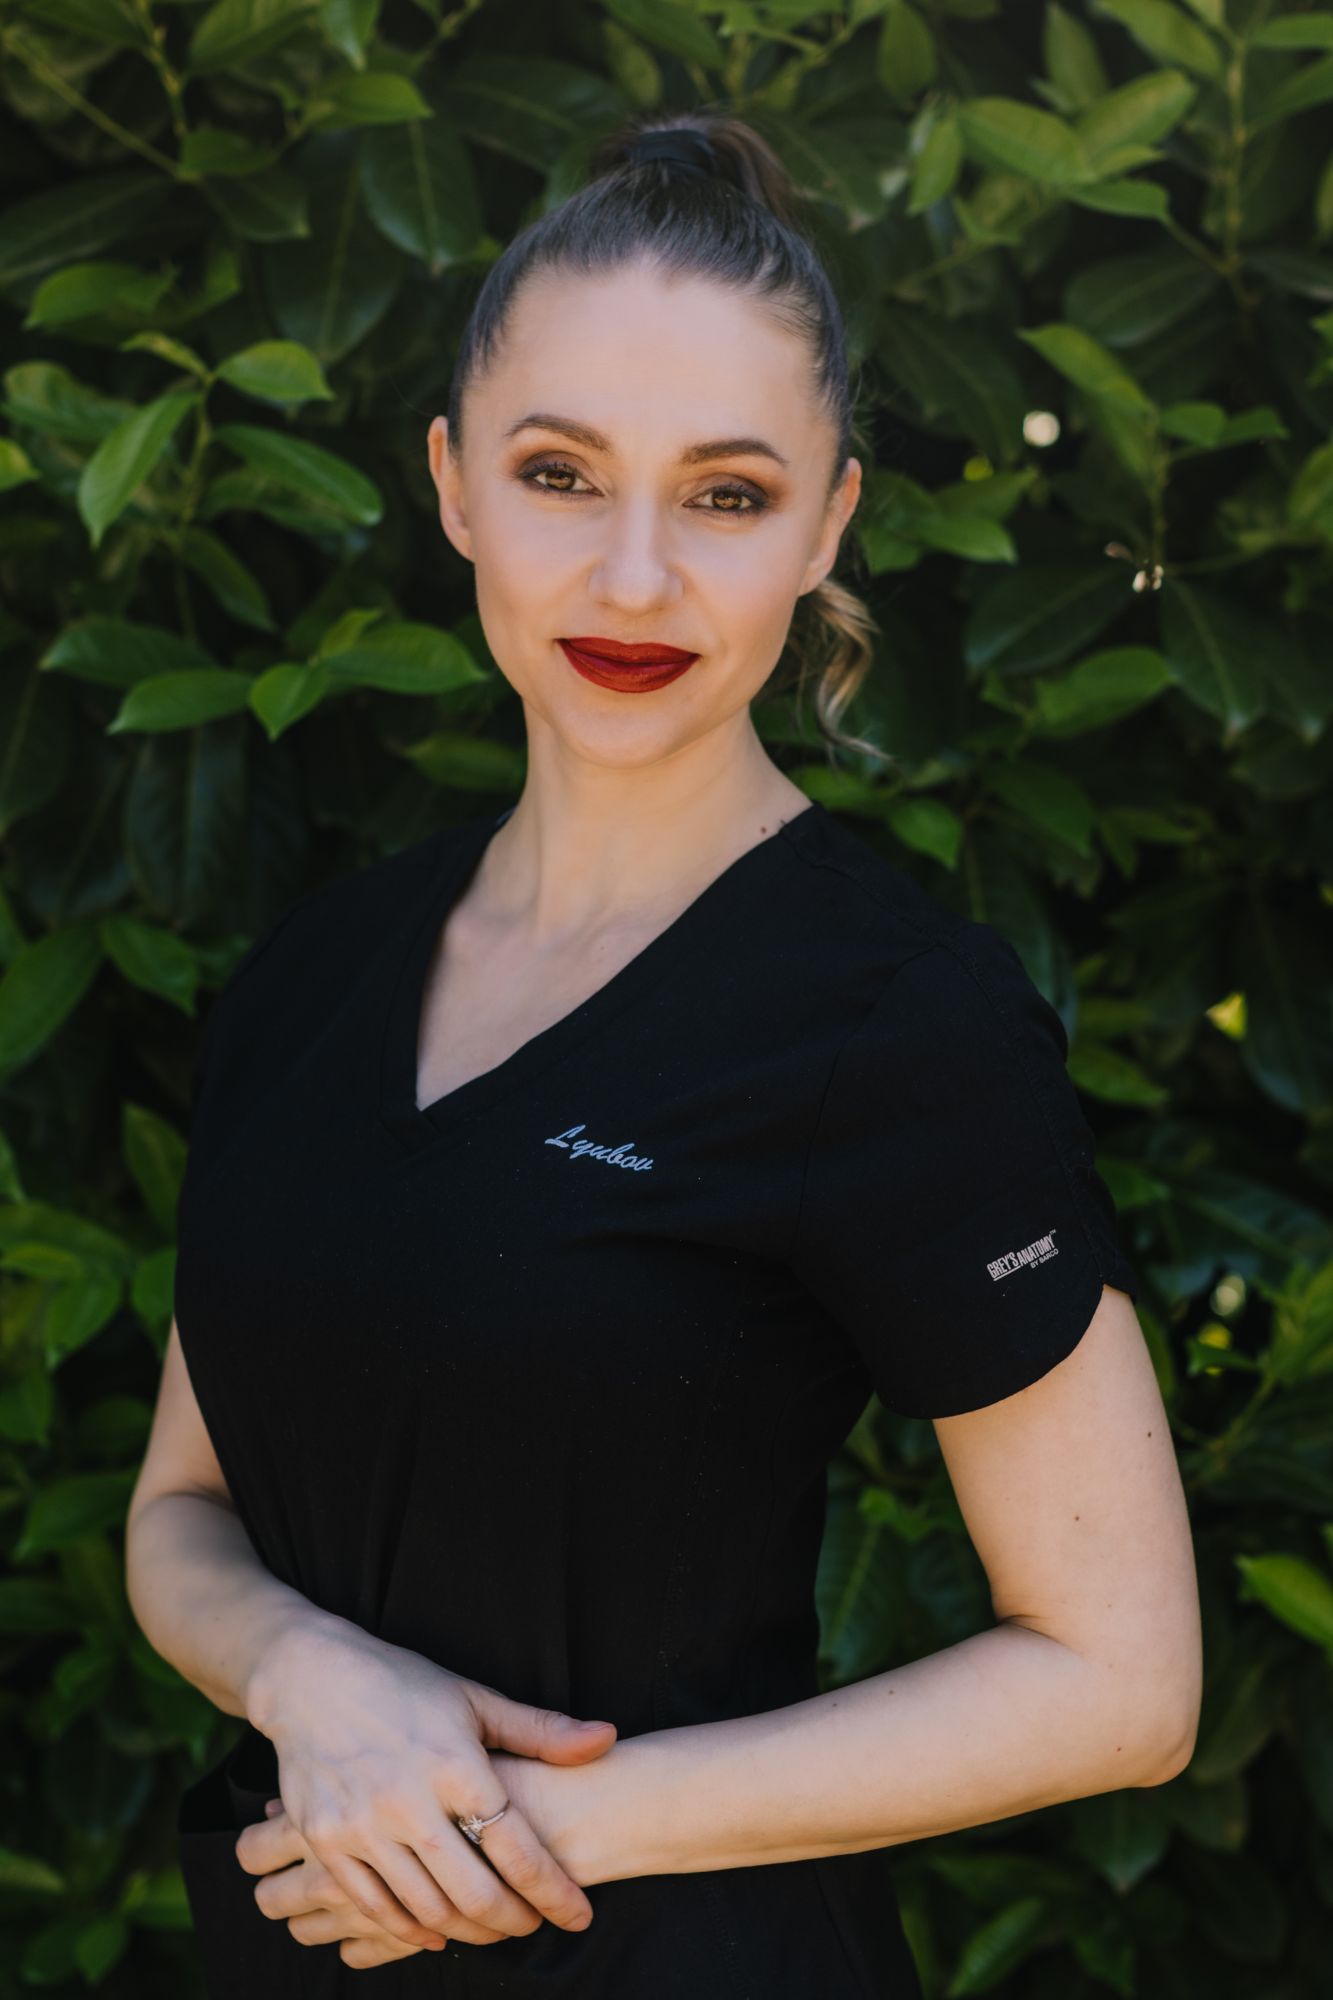 Lyubov office manager at division street dental clinic